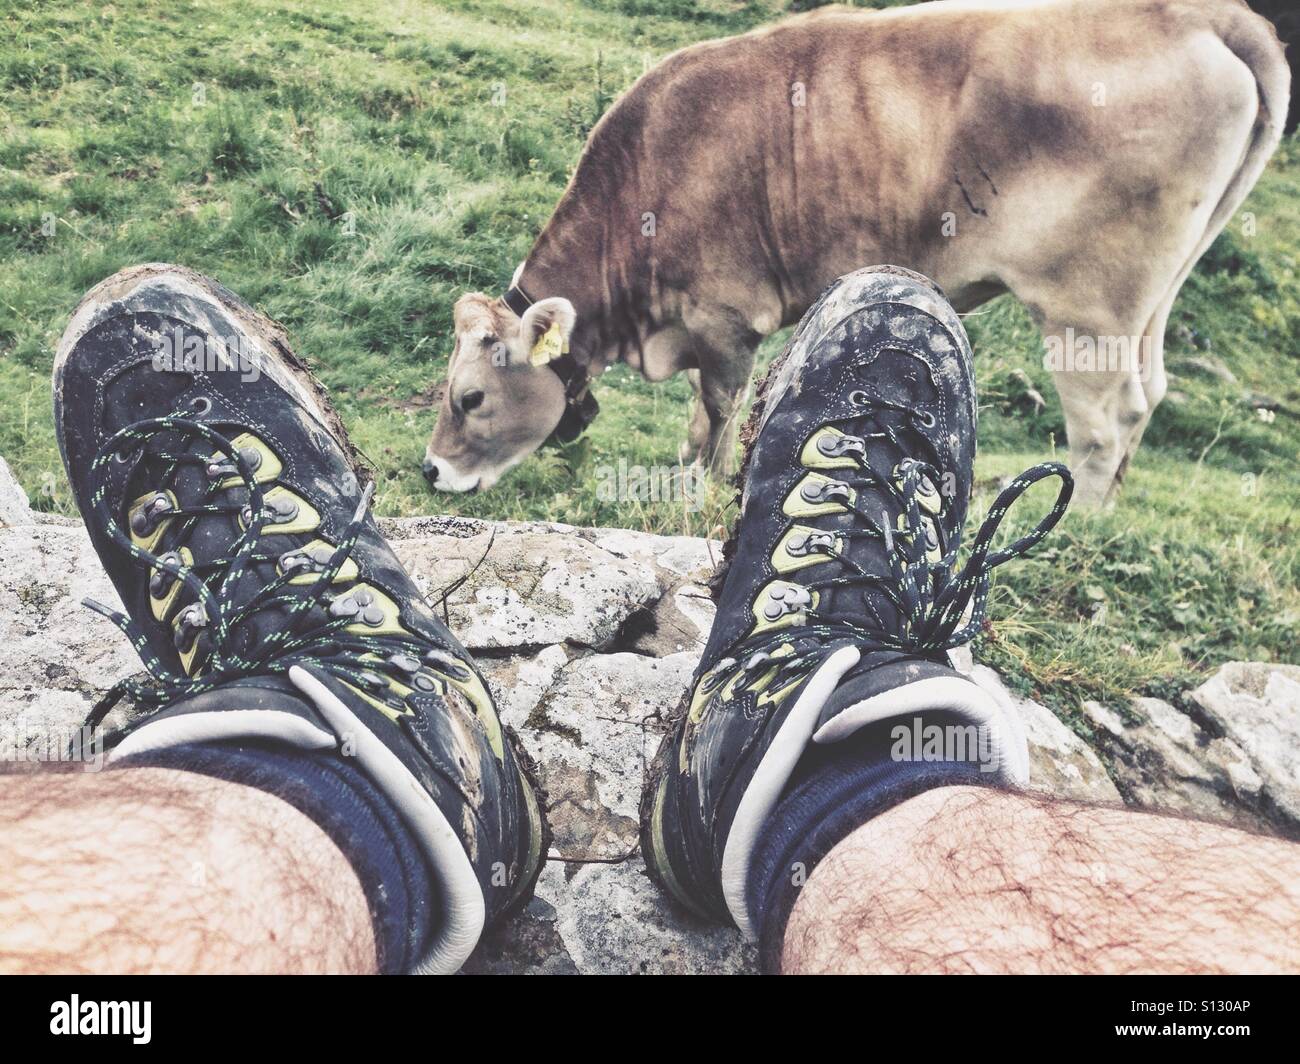 Hiking boots and a cow in the German Alps Stock Photo